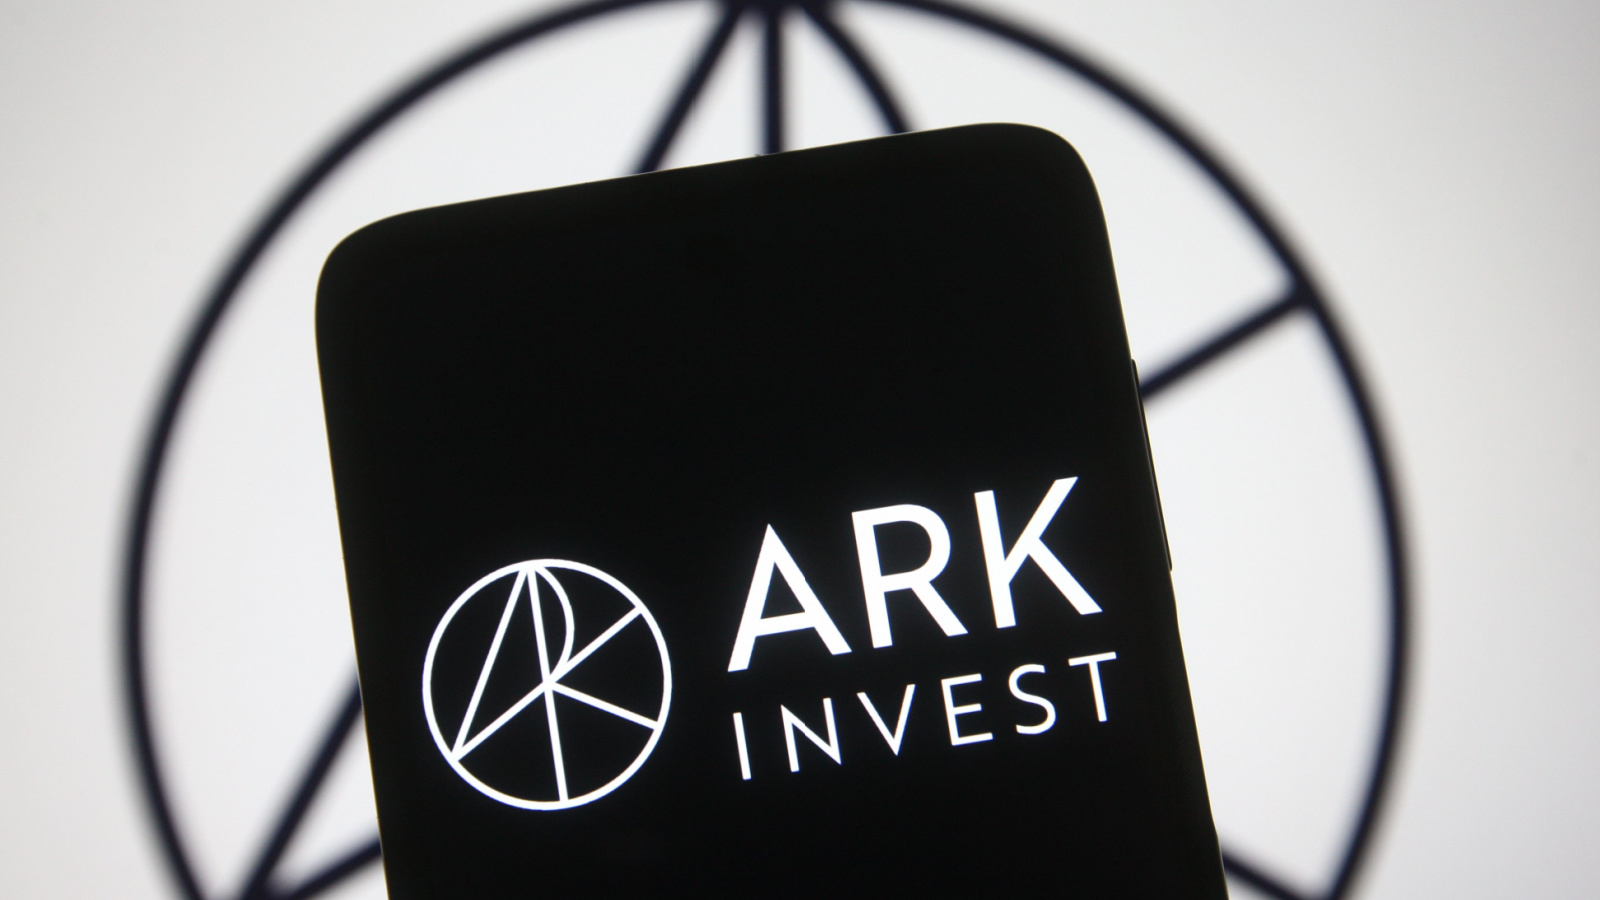 Logo for Ark Invest displayed on phone with logo in background as well, symbolizing Cathie Wood stocks